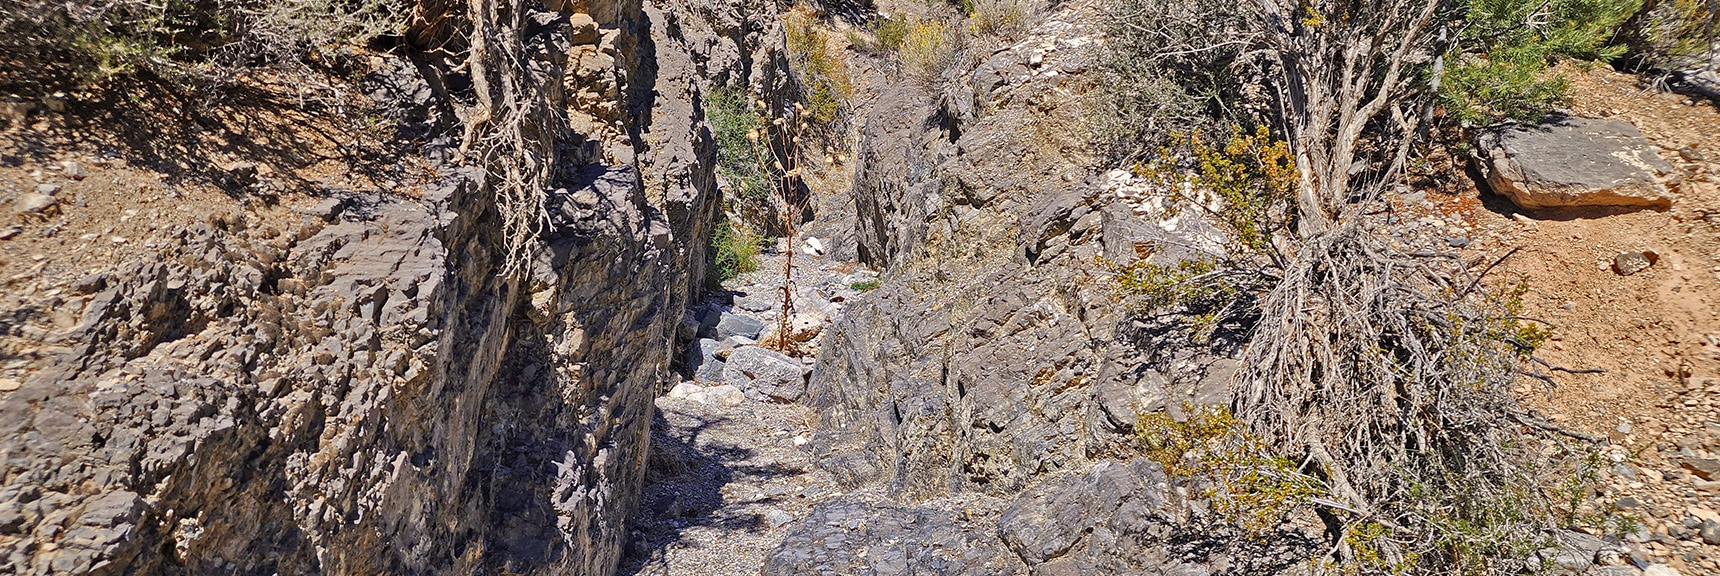 Looking Back Up to Narrow Area in Wash with Dry Waterfall. Could Circumvent to Right.| Kyle Canyon Grand Crossing | Southern Half | Red Rock Canyon National Conservation Area, Nevada